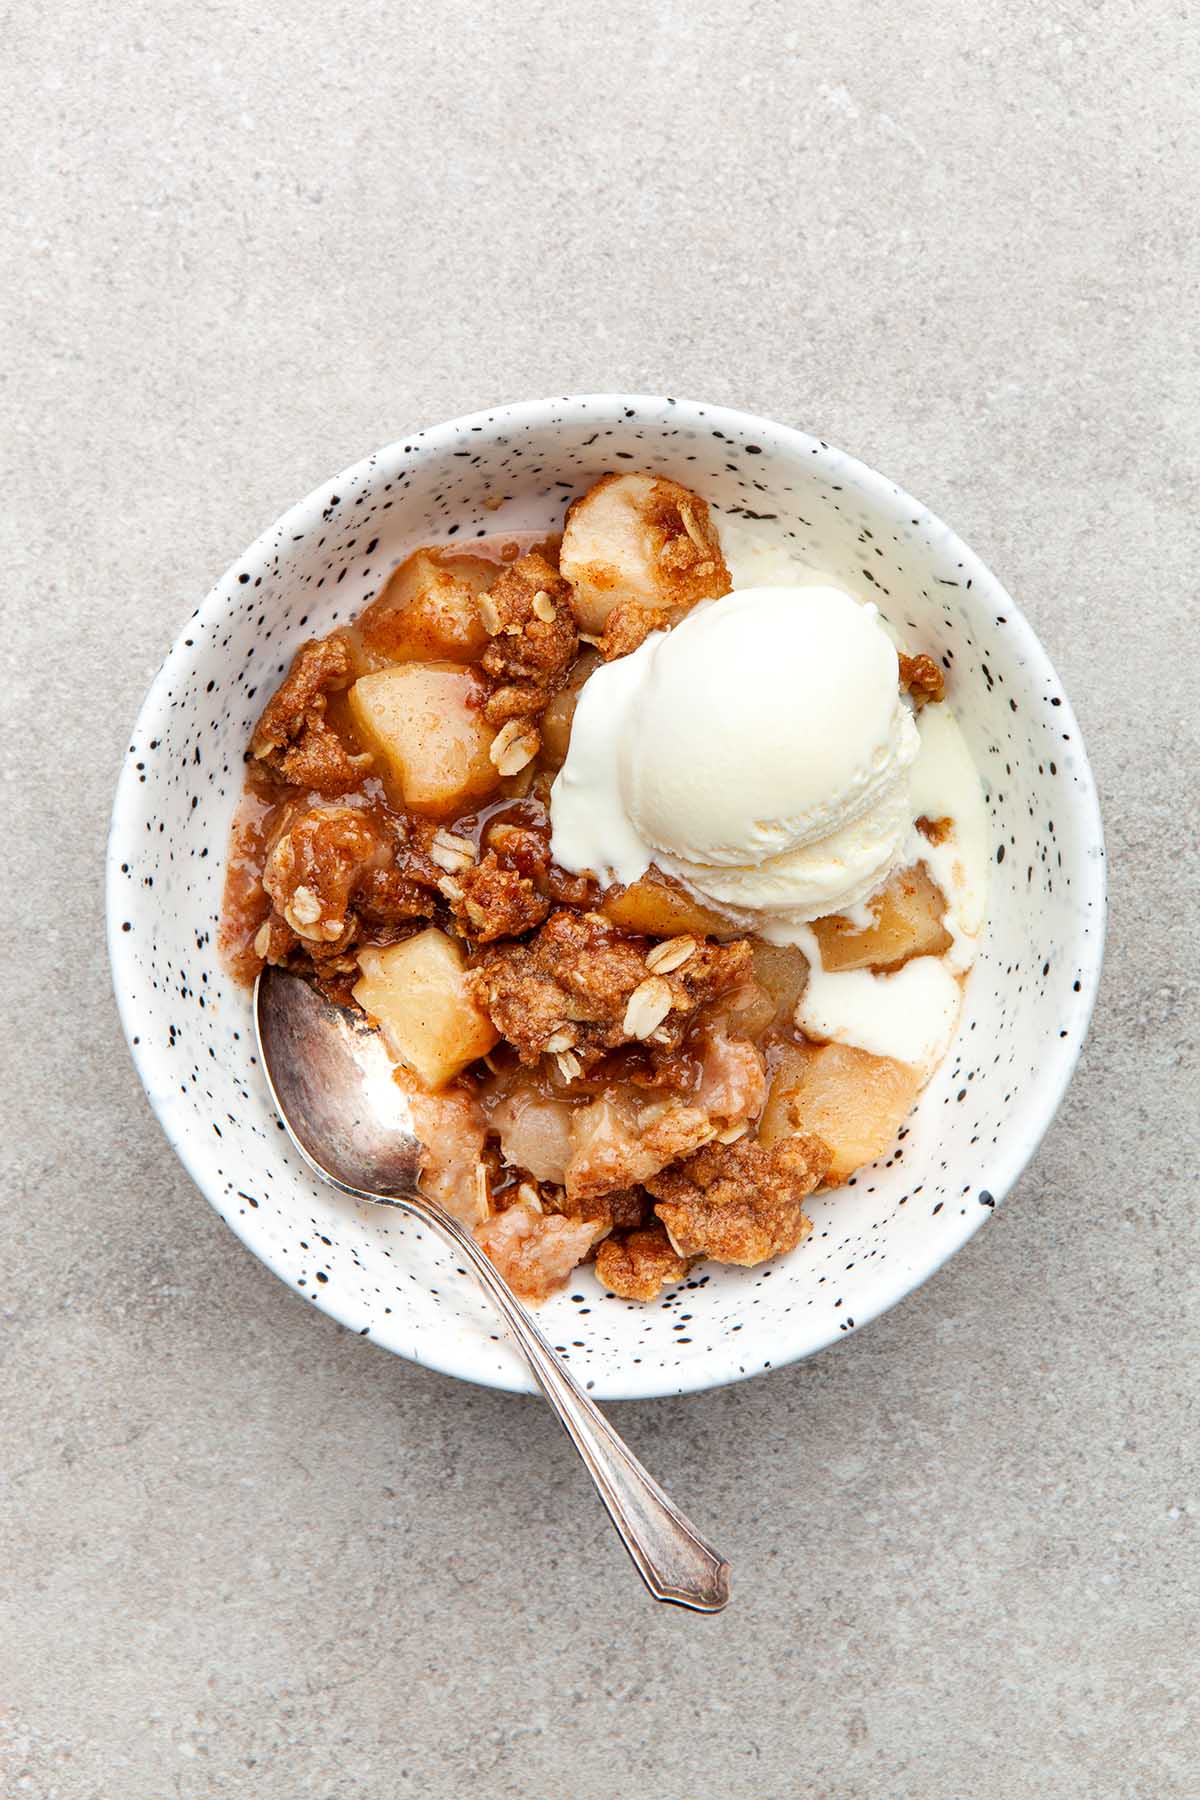 A bowl of apple crisp topped with ice cream in a speckled bowl.